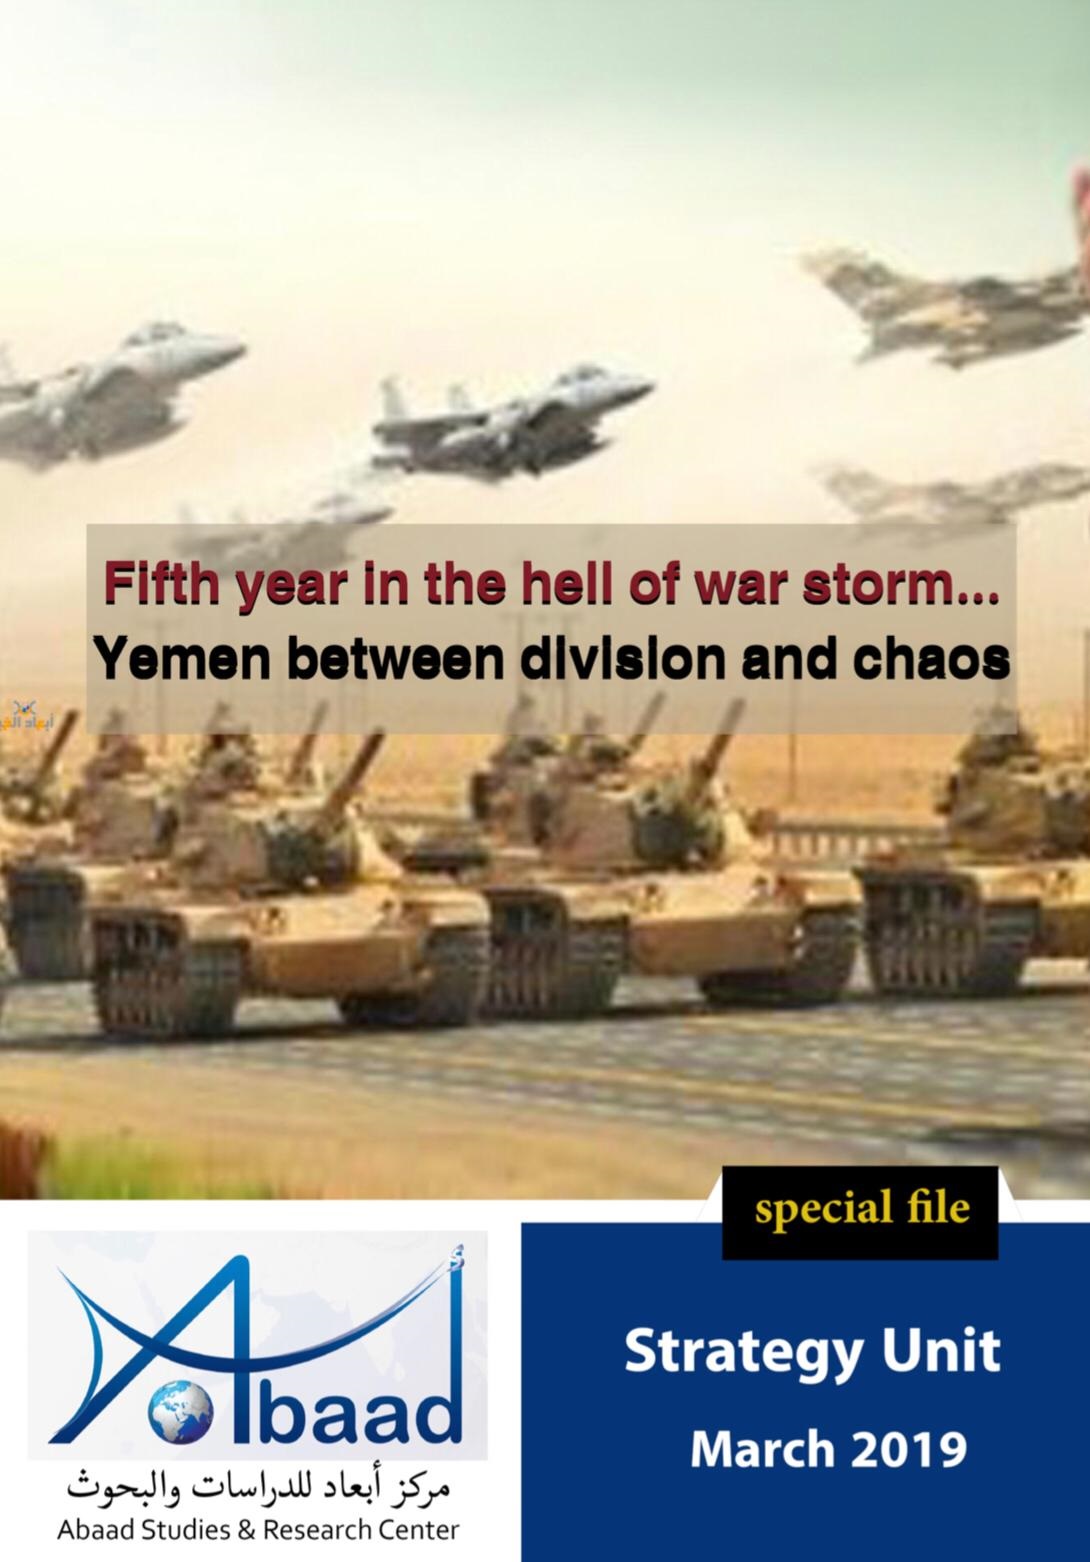  Fifth year in the hell of war storm...Yemen between division and chaos - PDF